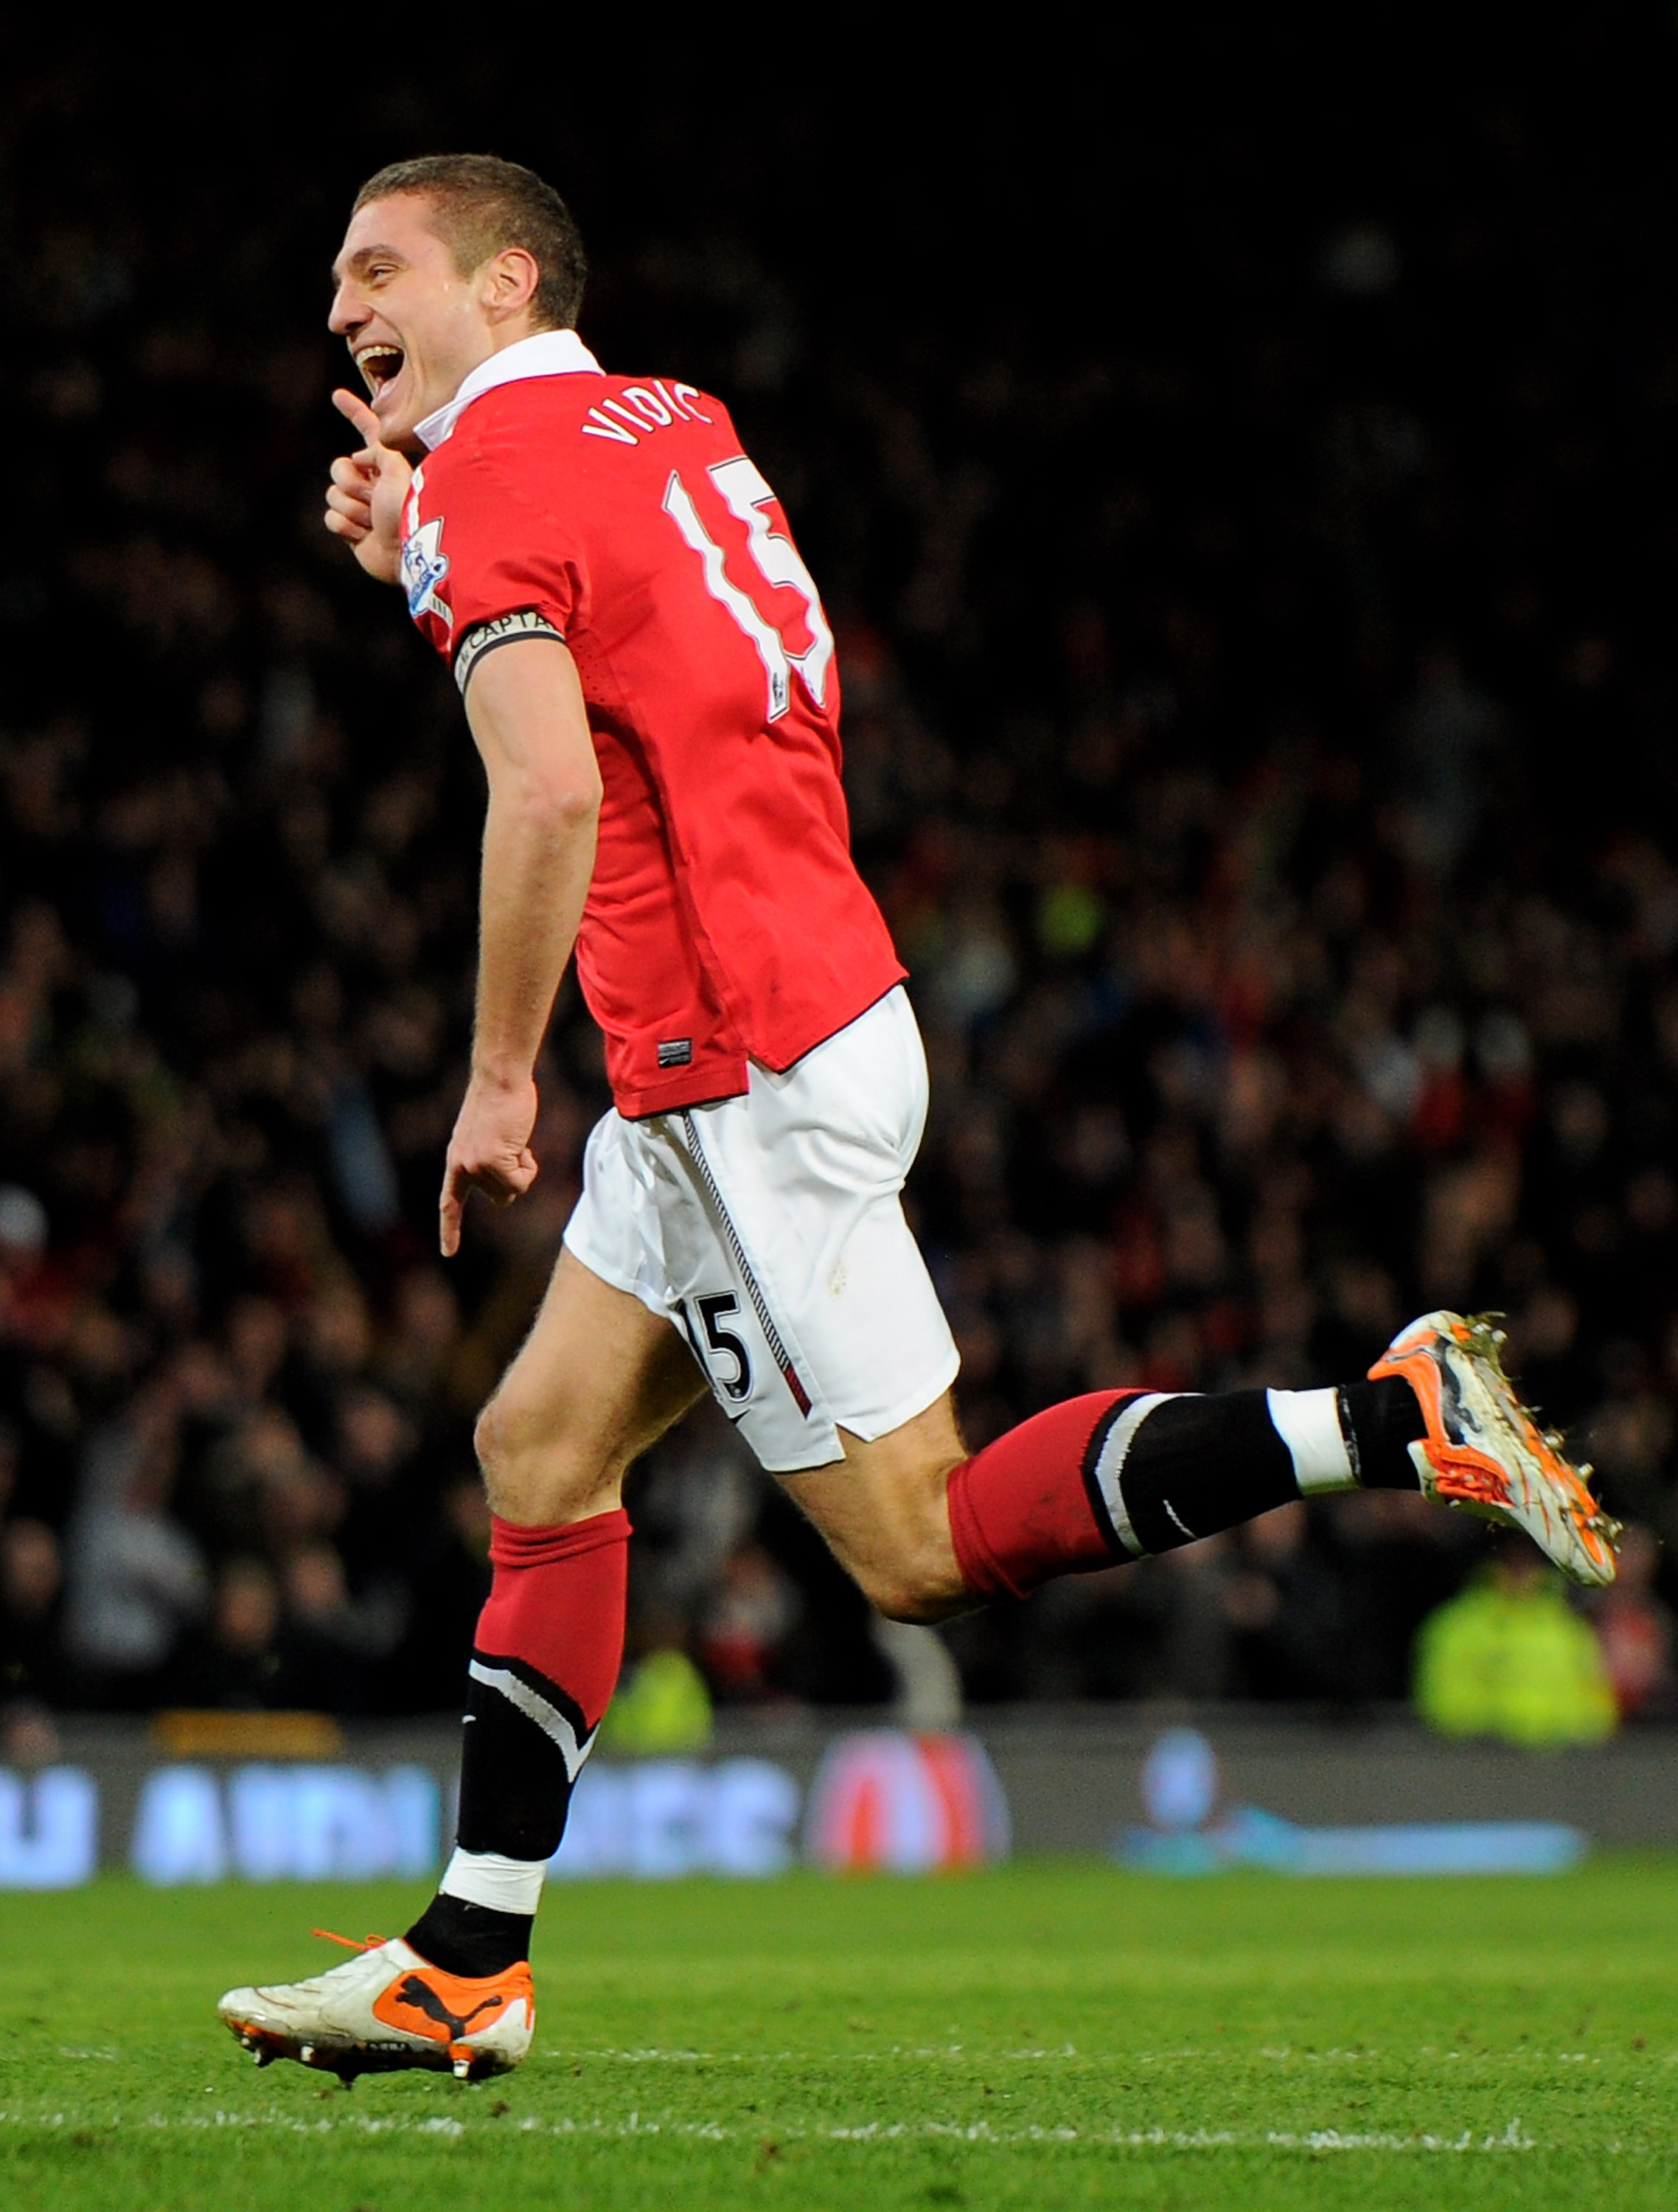 MANCHESTER, ENGLAND - FEBRUARY 01:  Nemanja Vidic of Manchester United celebrates scoring his team's third goal during the Barclays Premier League match between Manchester United and Aston Villa at Old Trafford on February 1, 2011 in Manchester, England.